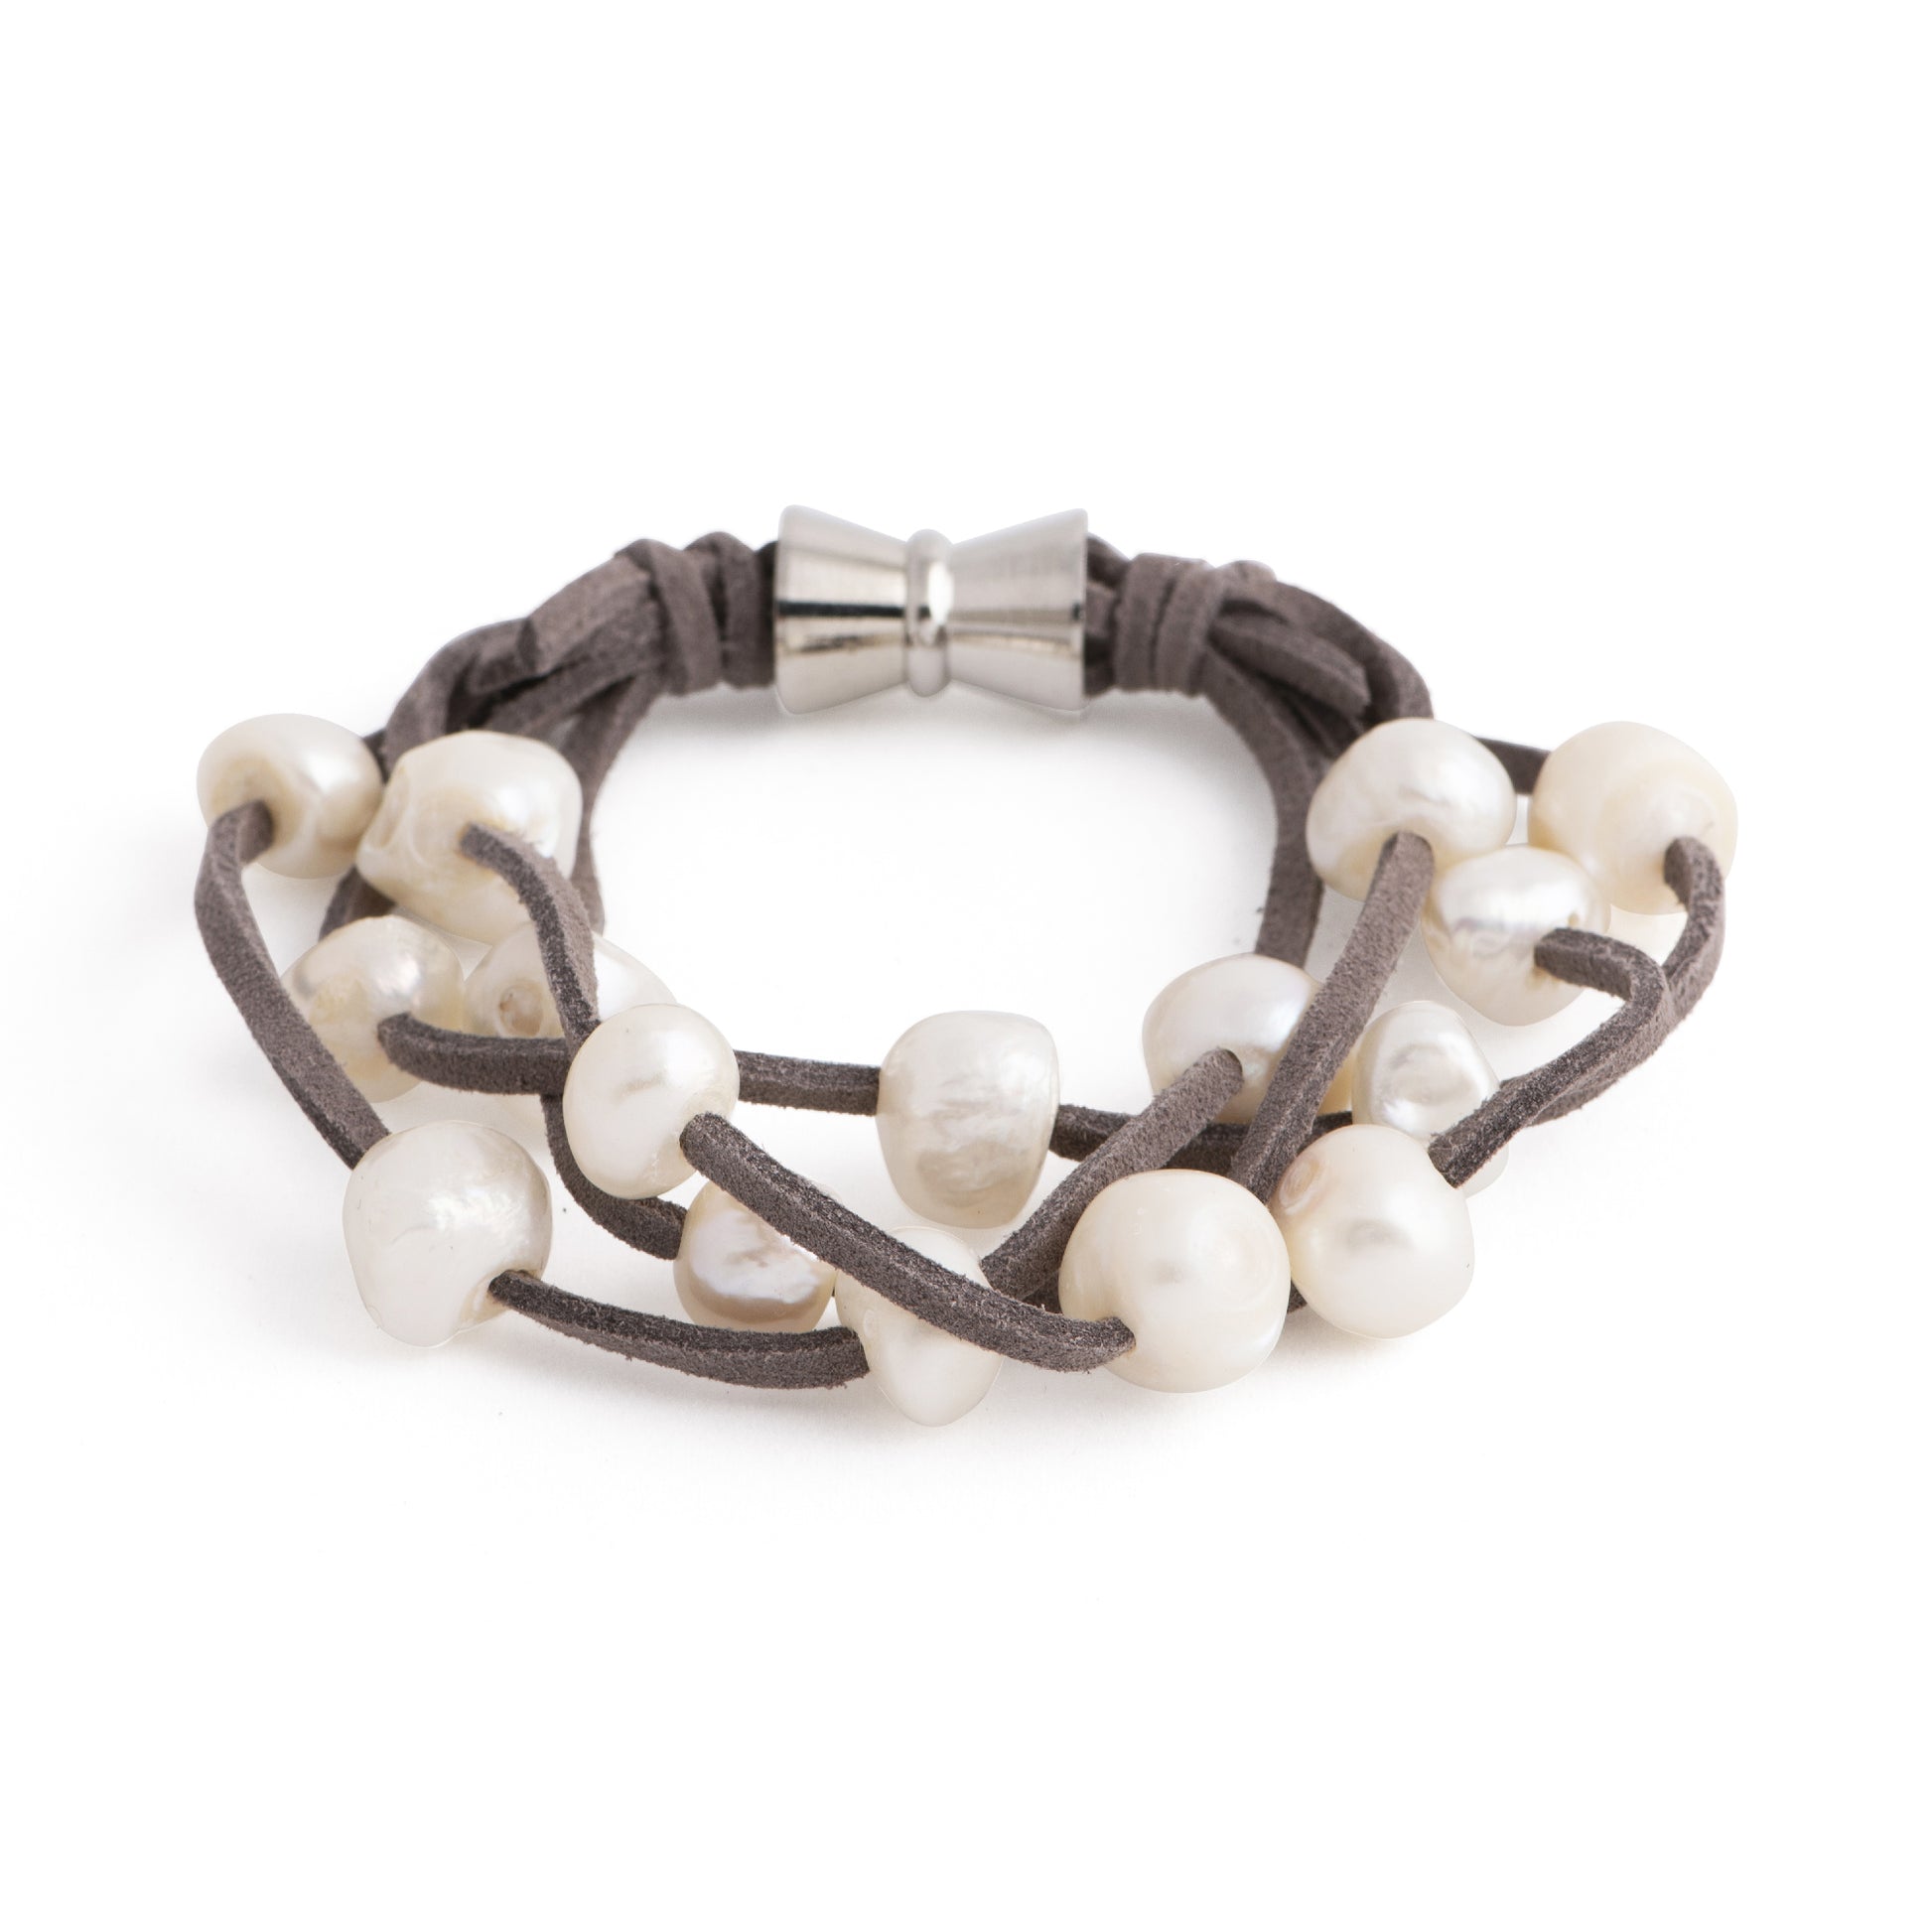 Bengal - Suede multi-layer bracelet with freshwater pearls and magnetic clasp (Dark grey suede, white pearls)